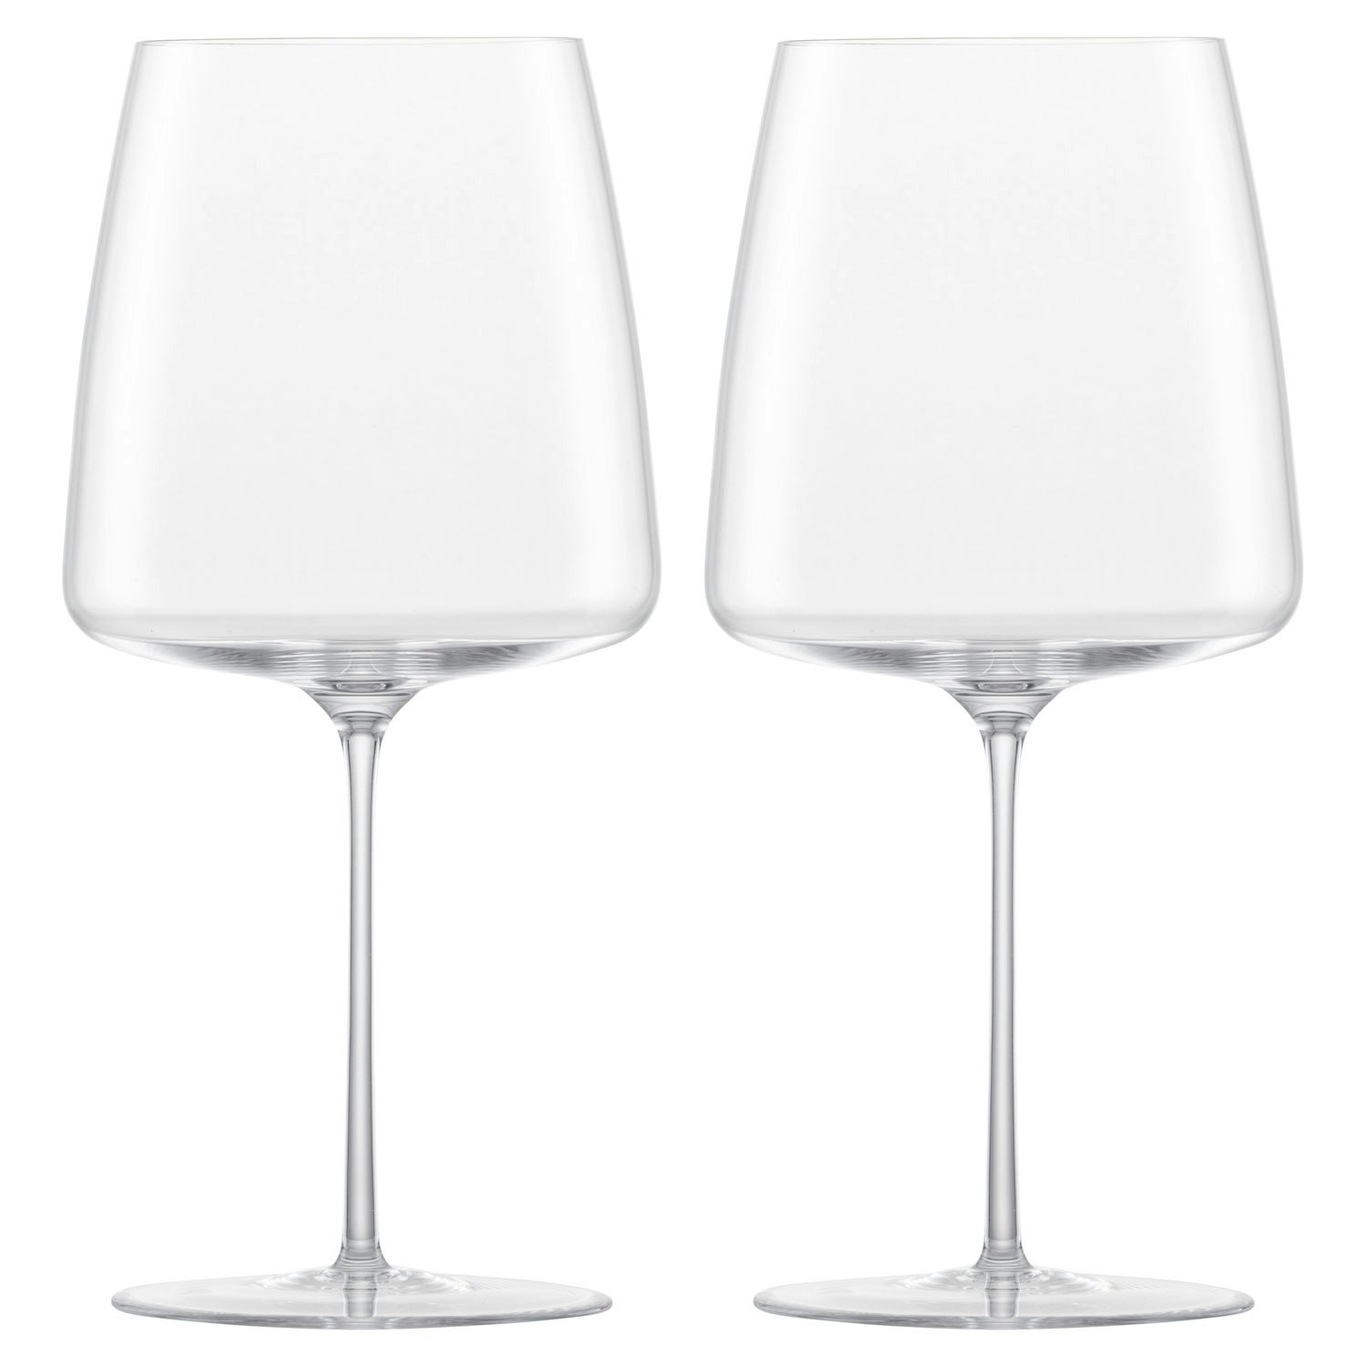 https://royaldesign.com/image/2/zwiesel-simplify-velvety-sumptuous-wine-glass-74-cl-2-pack-0?w=800&quality=80